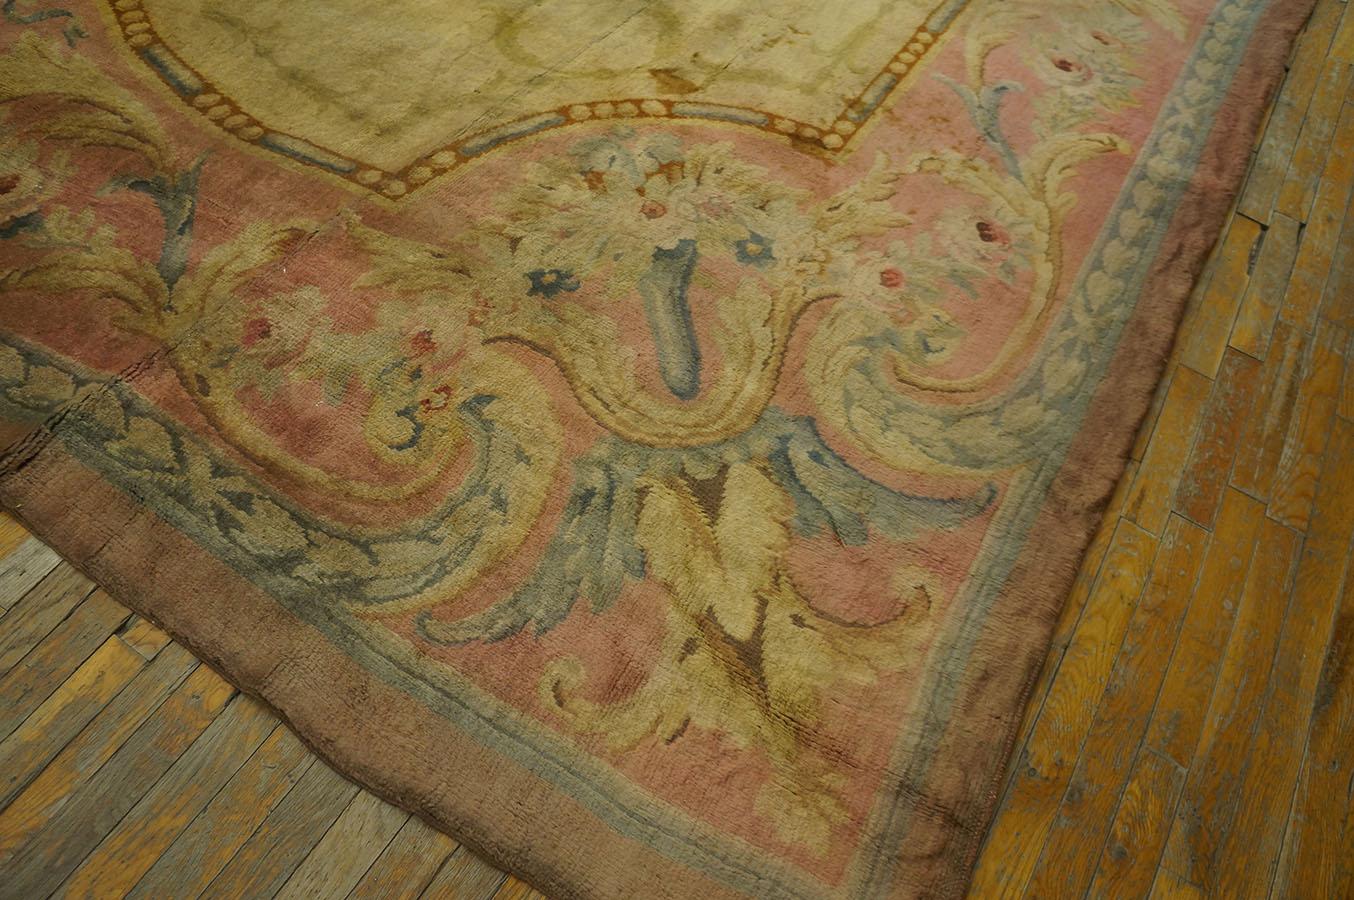 Late 19th Century French Savonnerie Carpet (12' 3'' x 21' - 375 x 640 cm ) In Good Condition For Sale In New York, NY